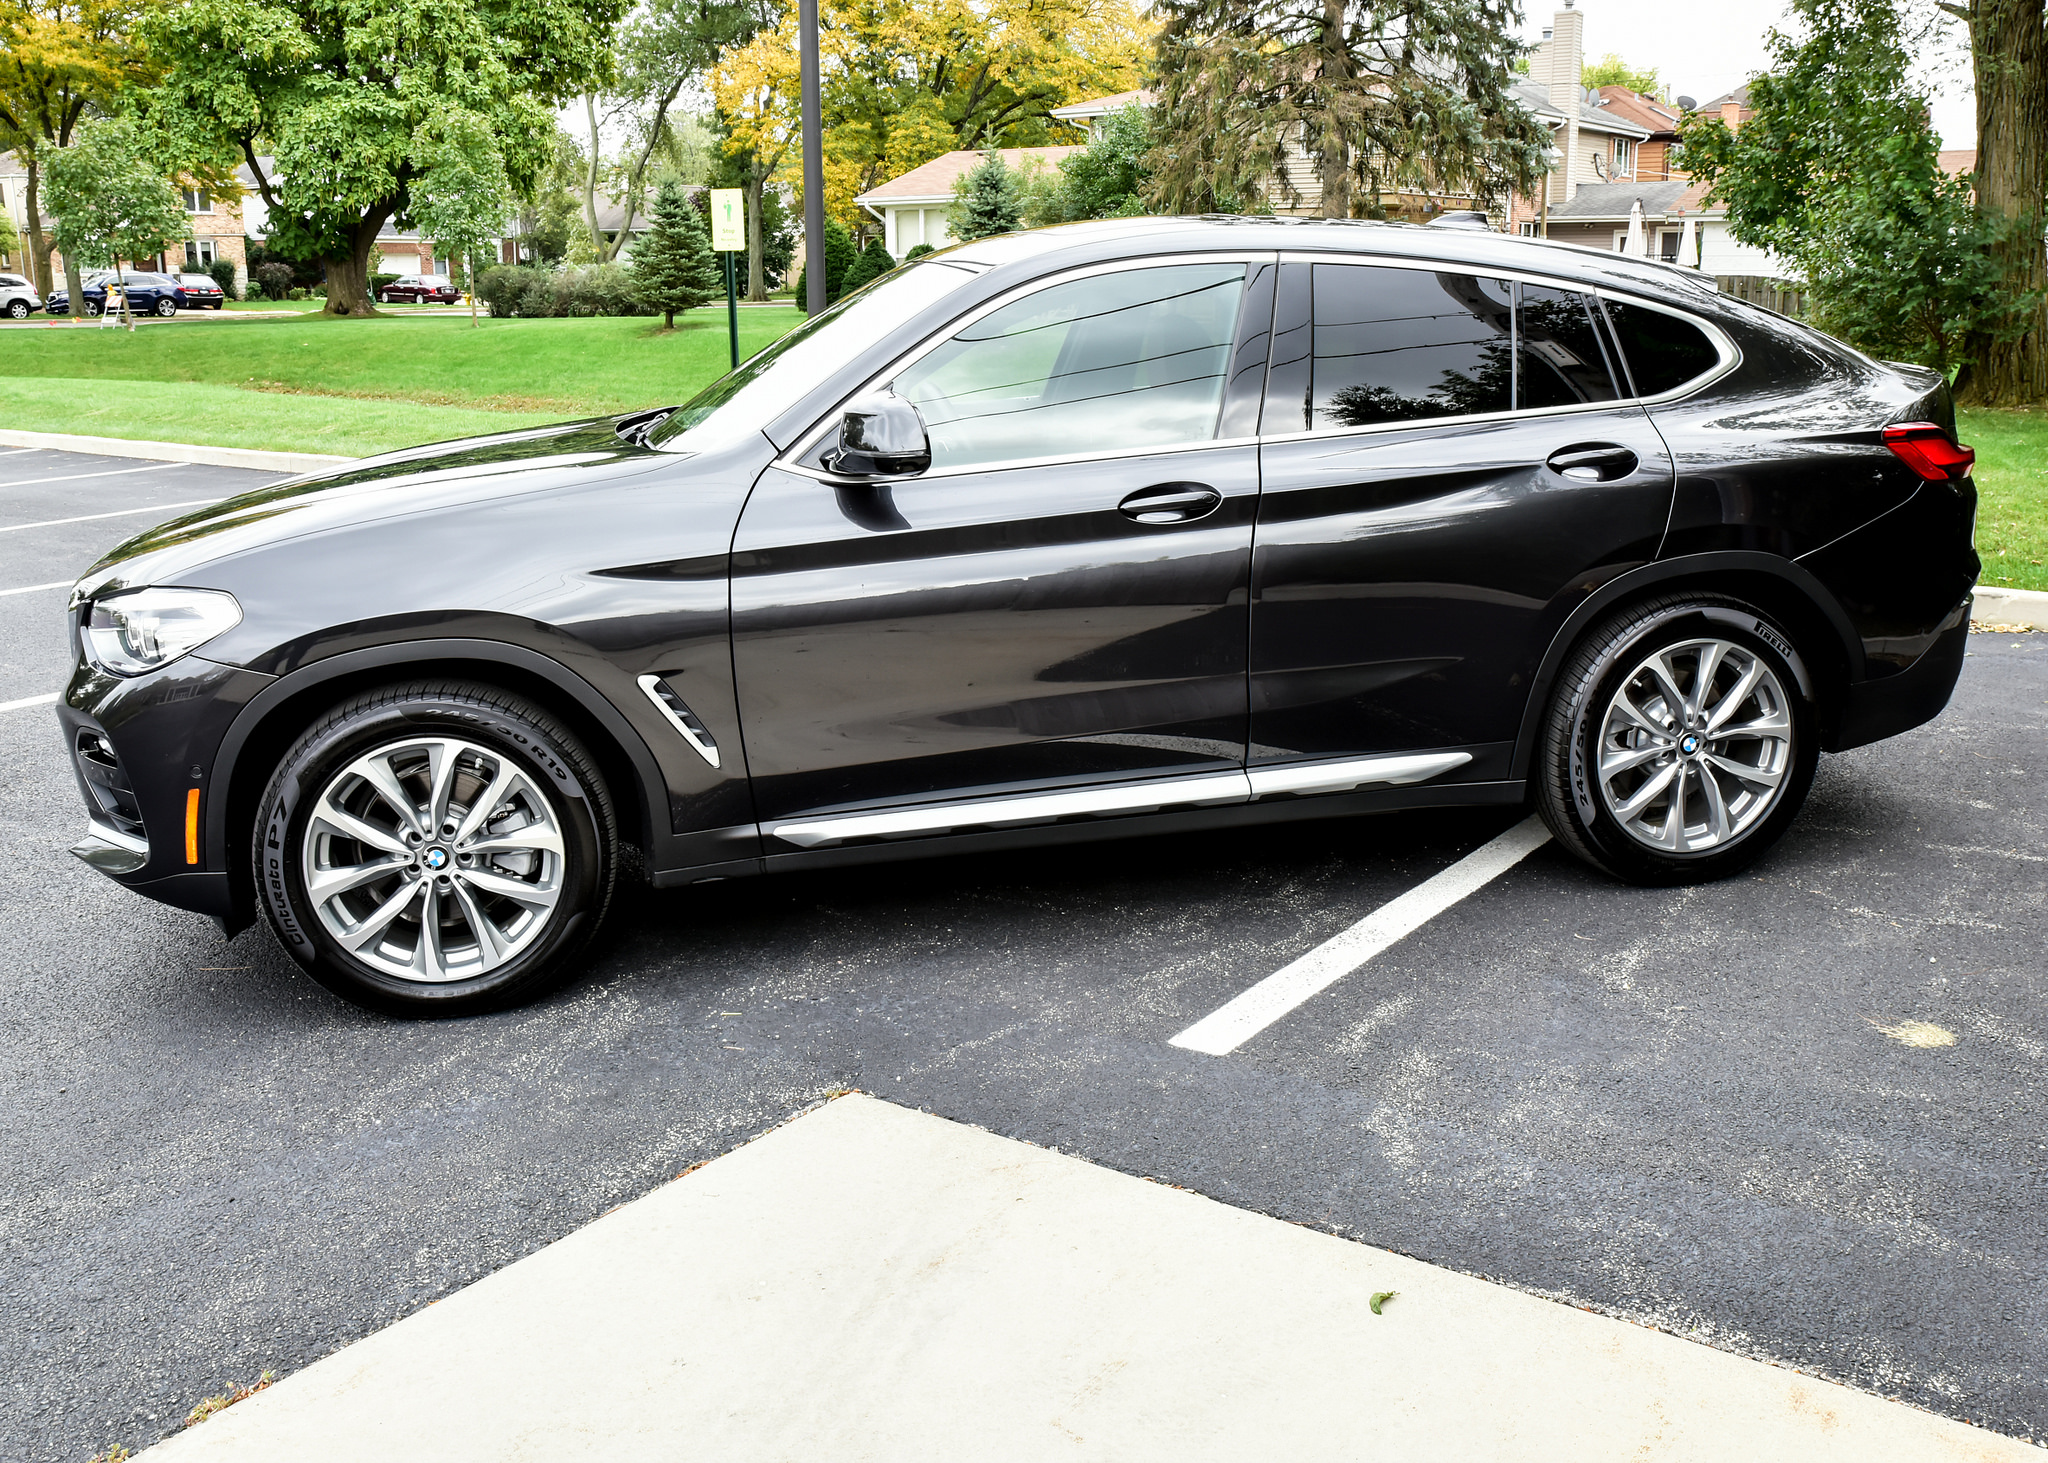 Party in the front, pain in the back: The BMW X4 reviewed